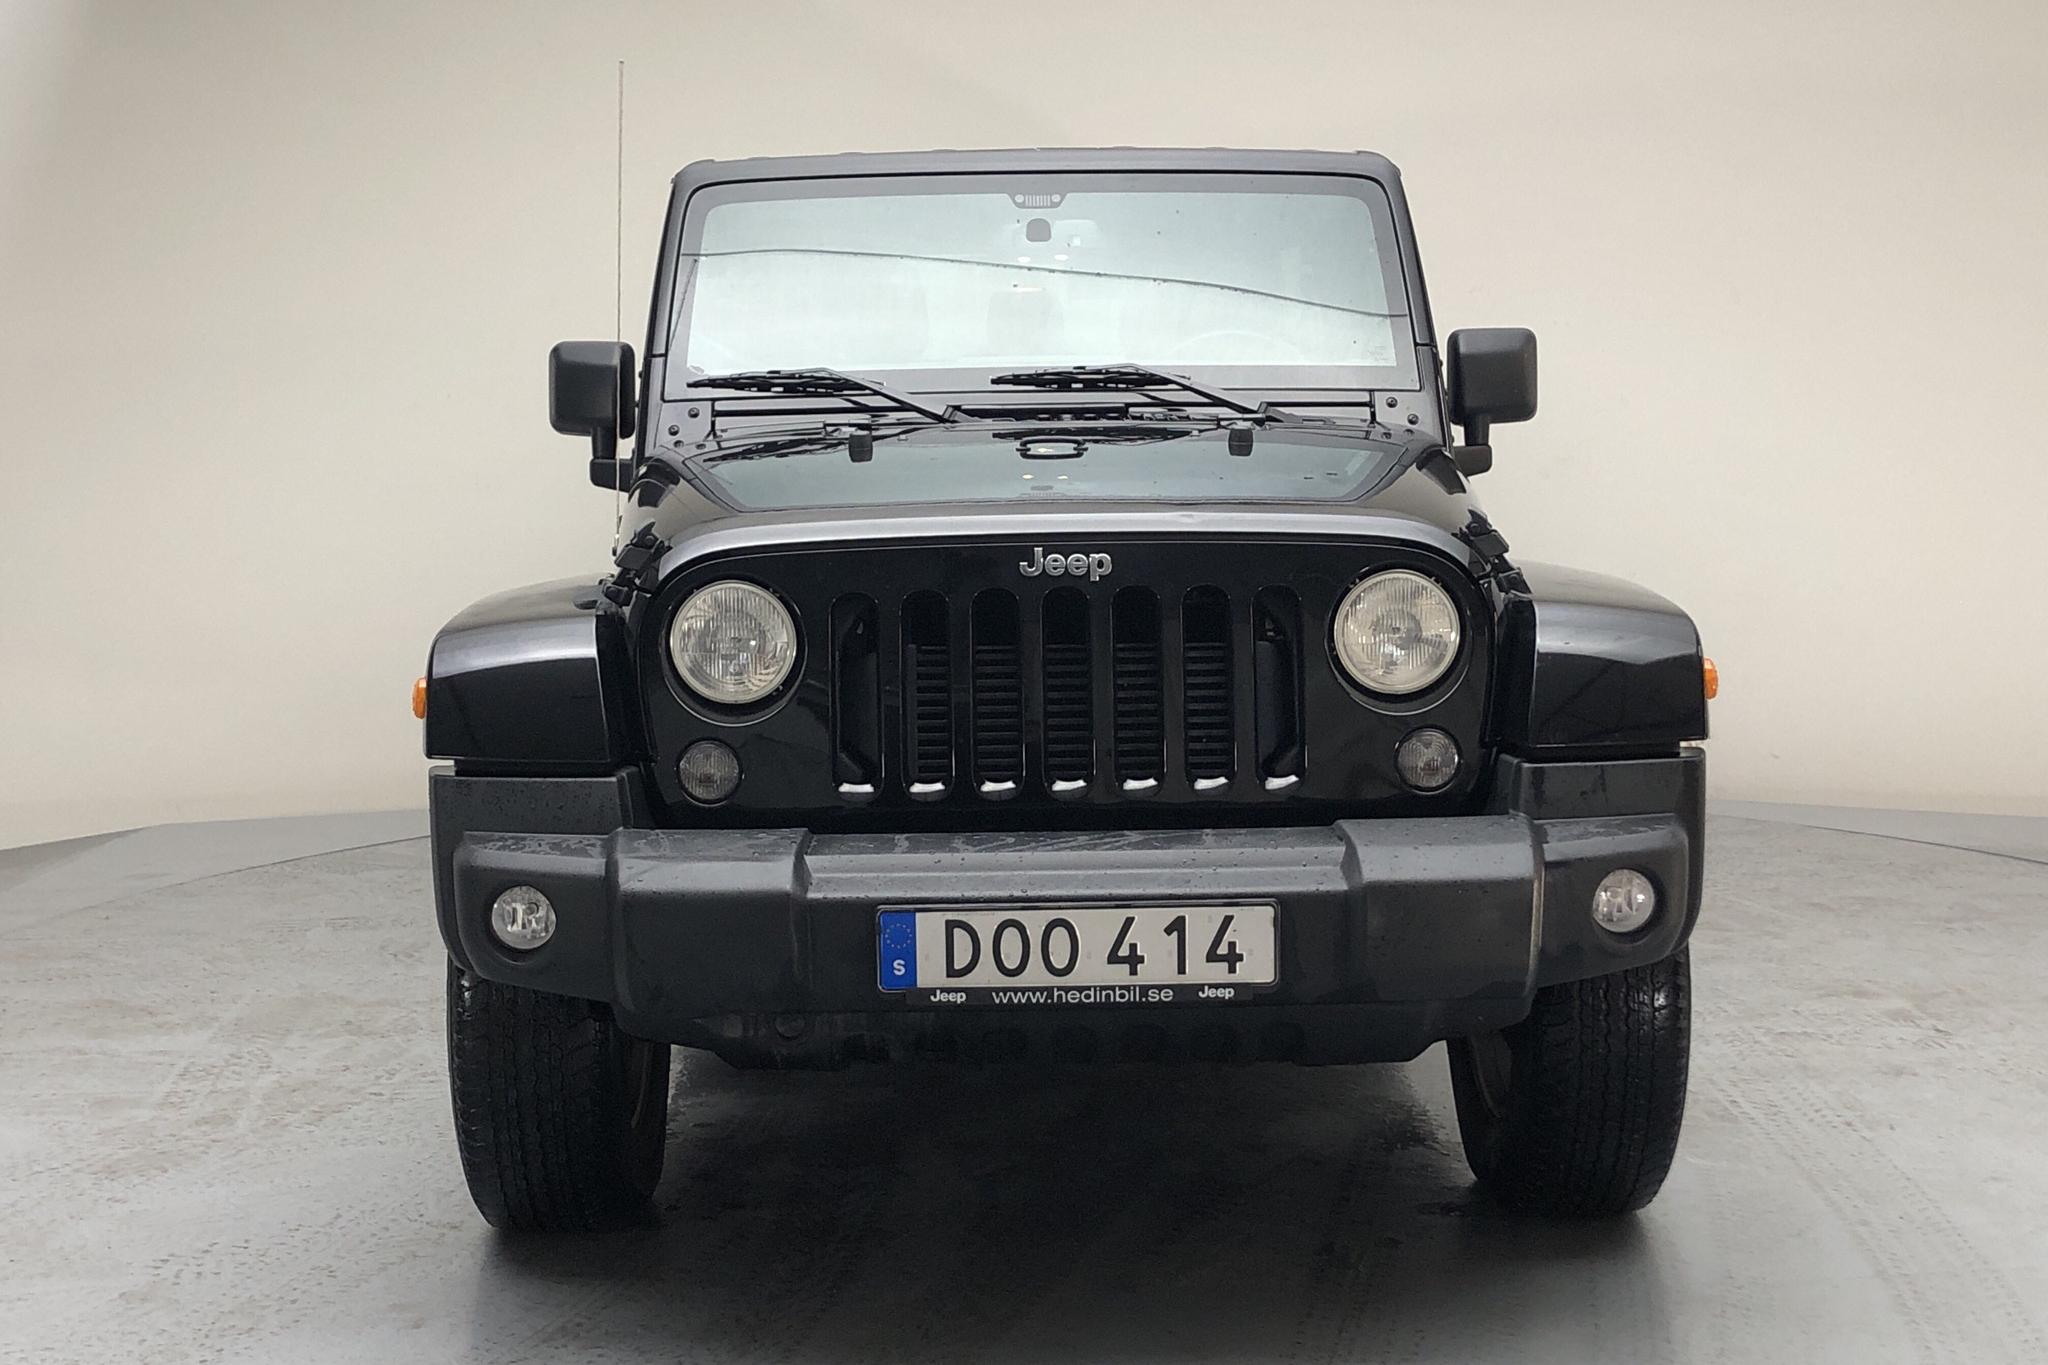 Jeep Wrangler Unlimited 2.8 CRD 4dr (200hk) - 58 830 km - Automatic - black - 2015